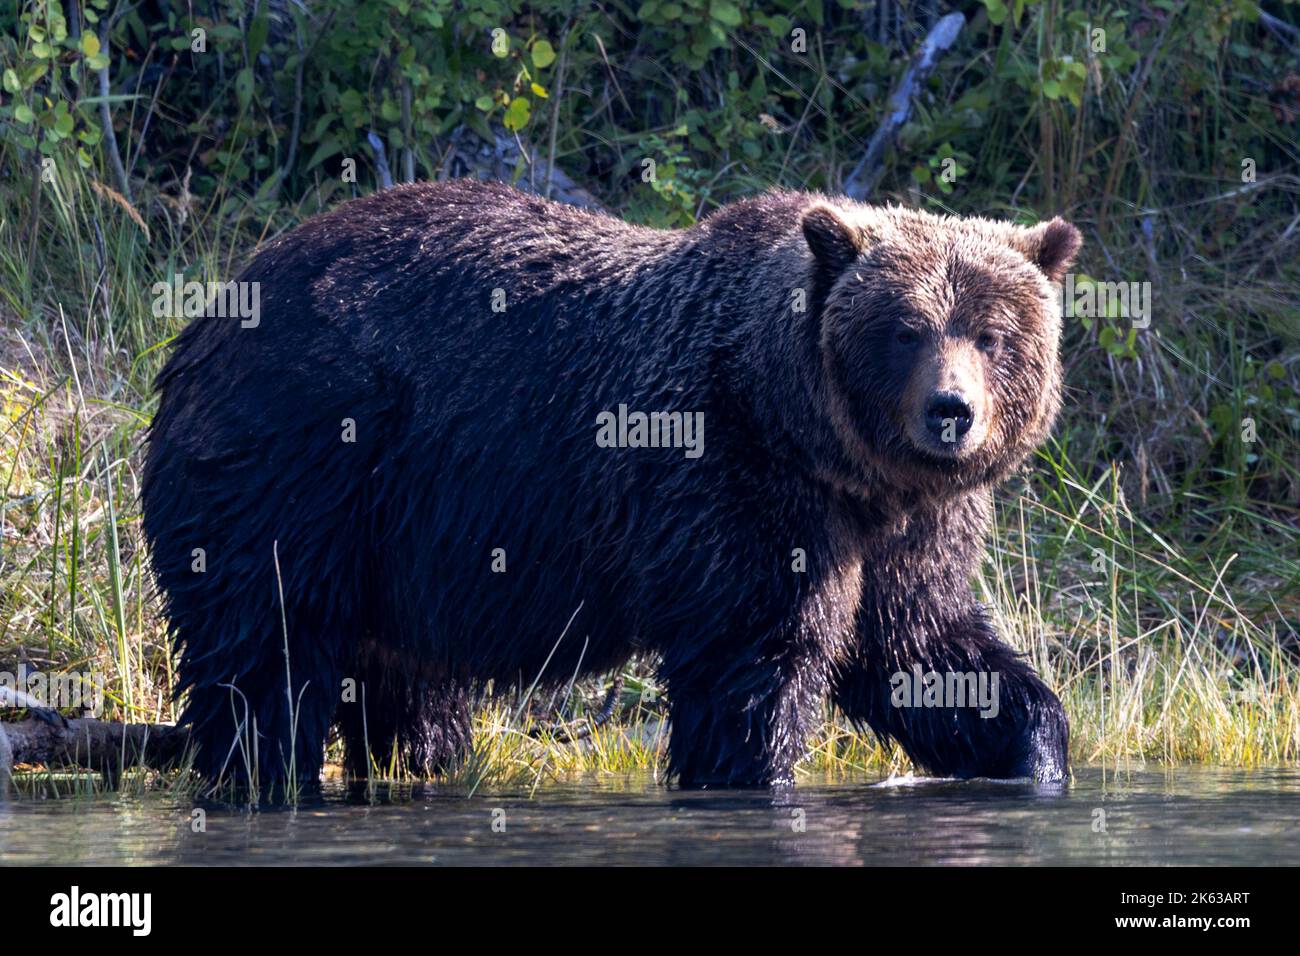 Grizzly bears along the Chilko River Stock Photo